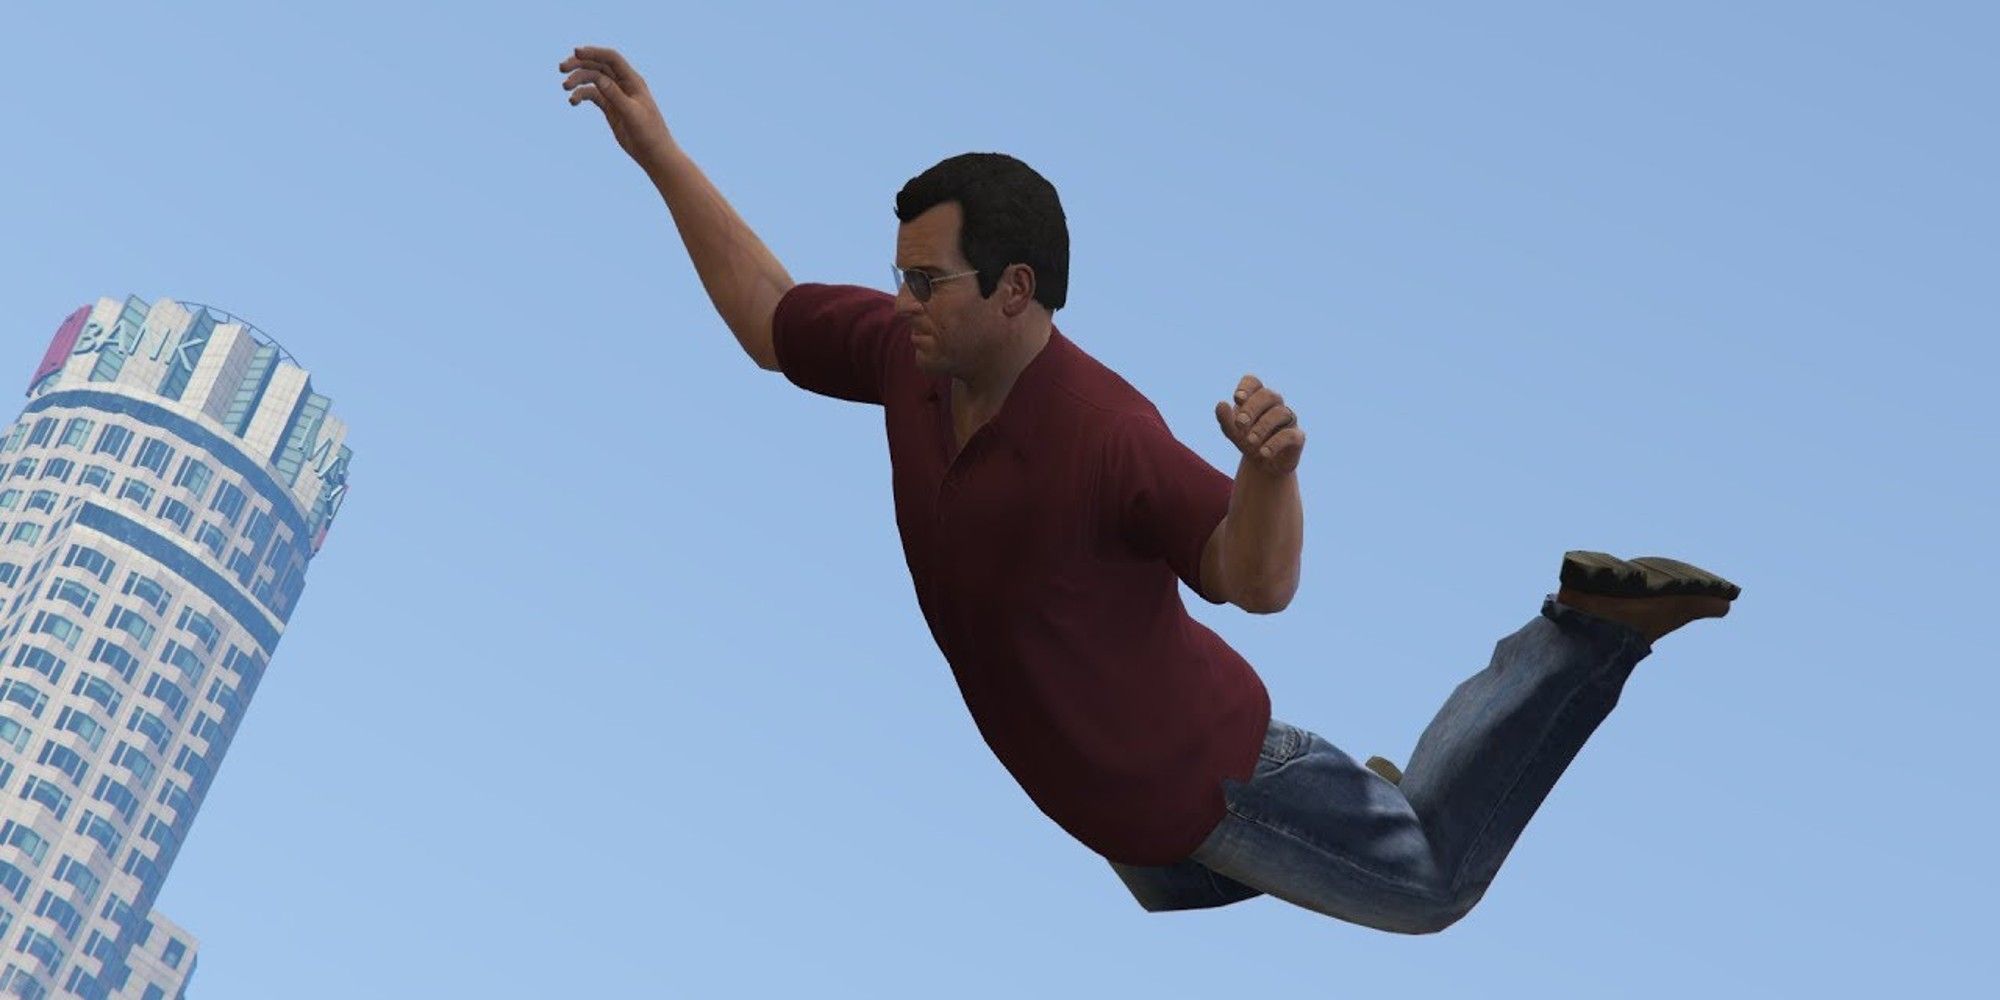 GTA V Michael Falling in mid air, with a bank in the background